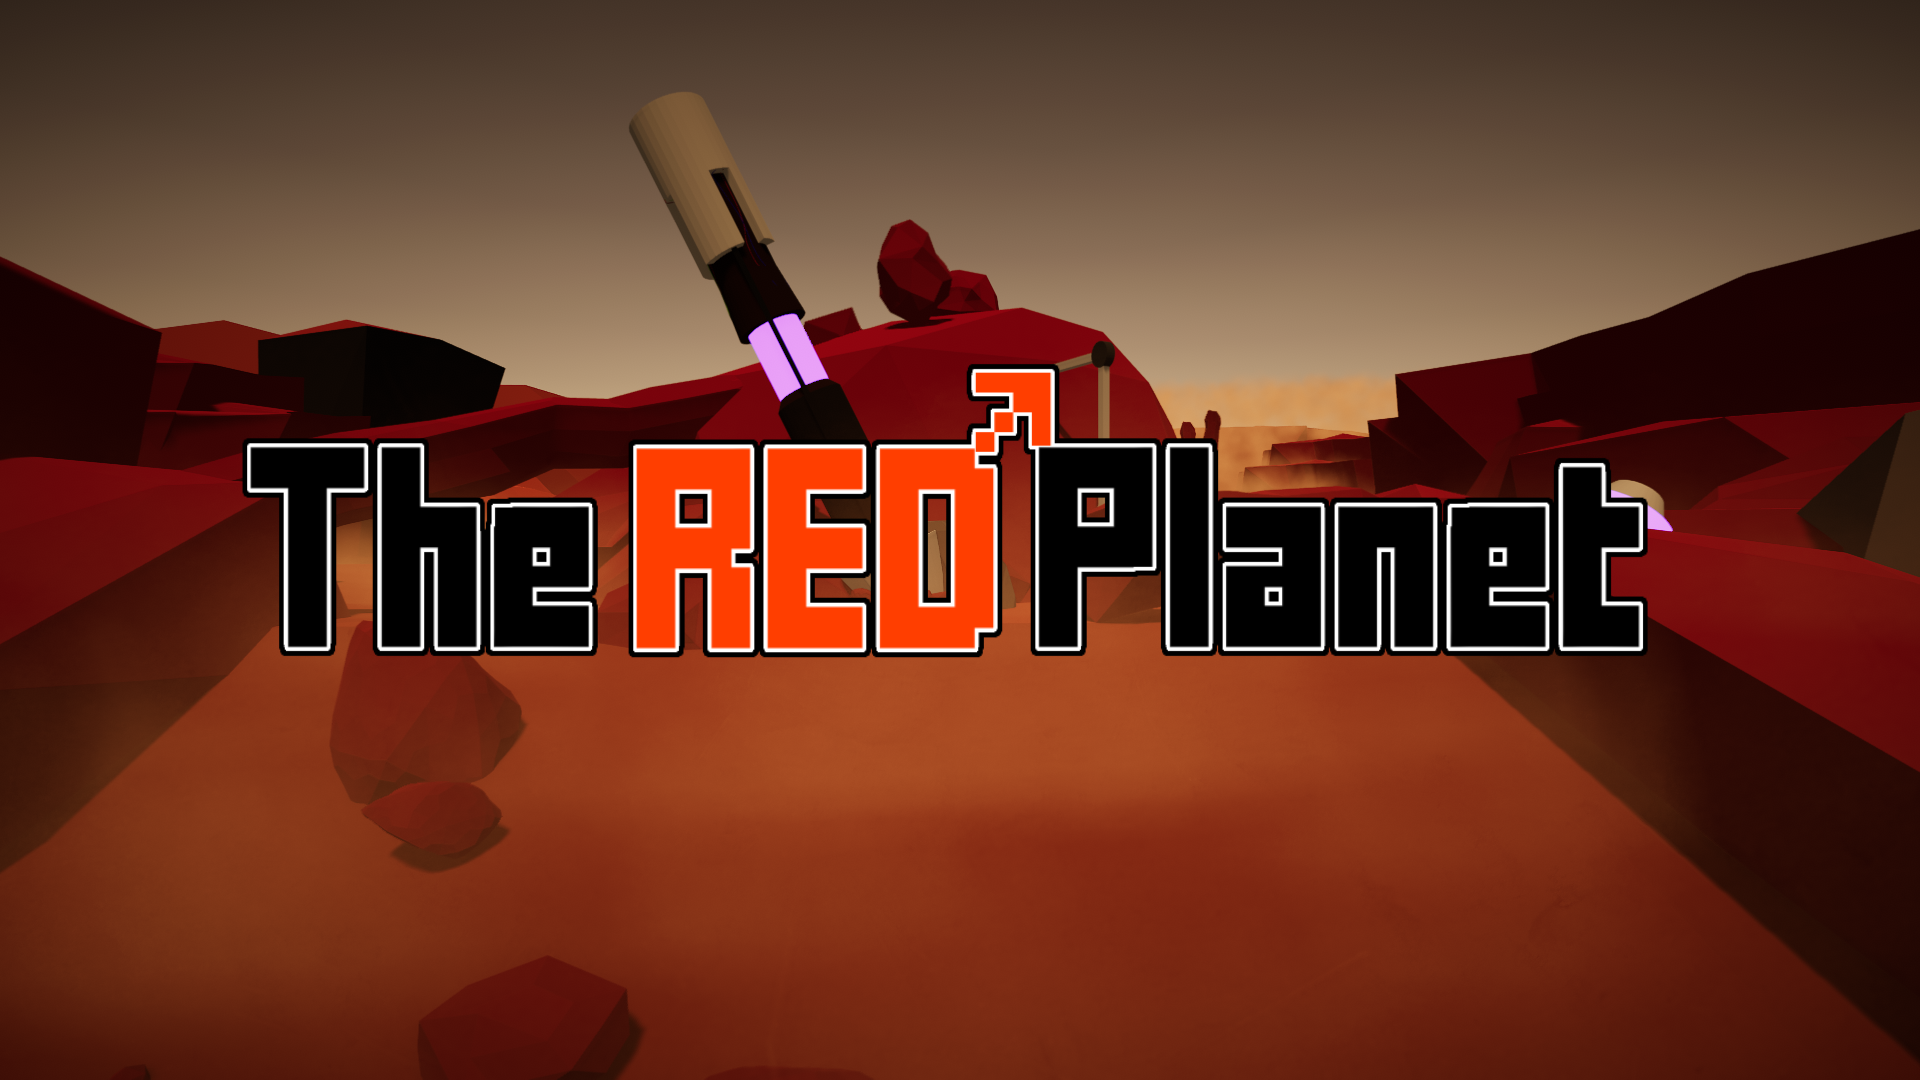 The RED Planet